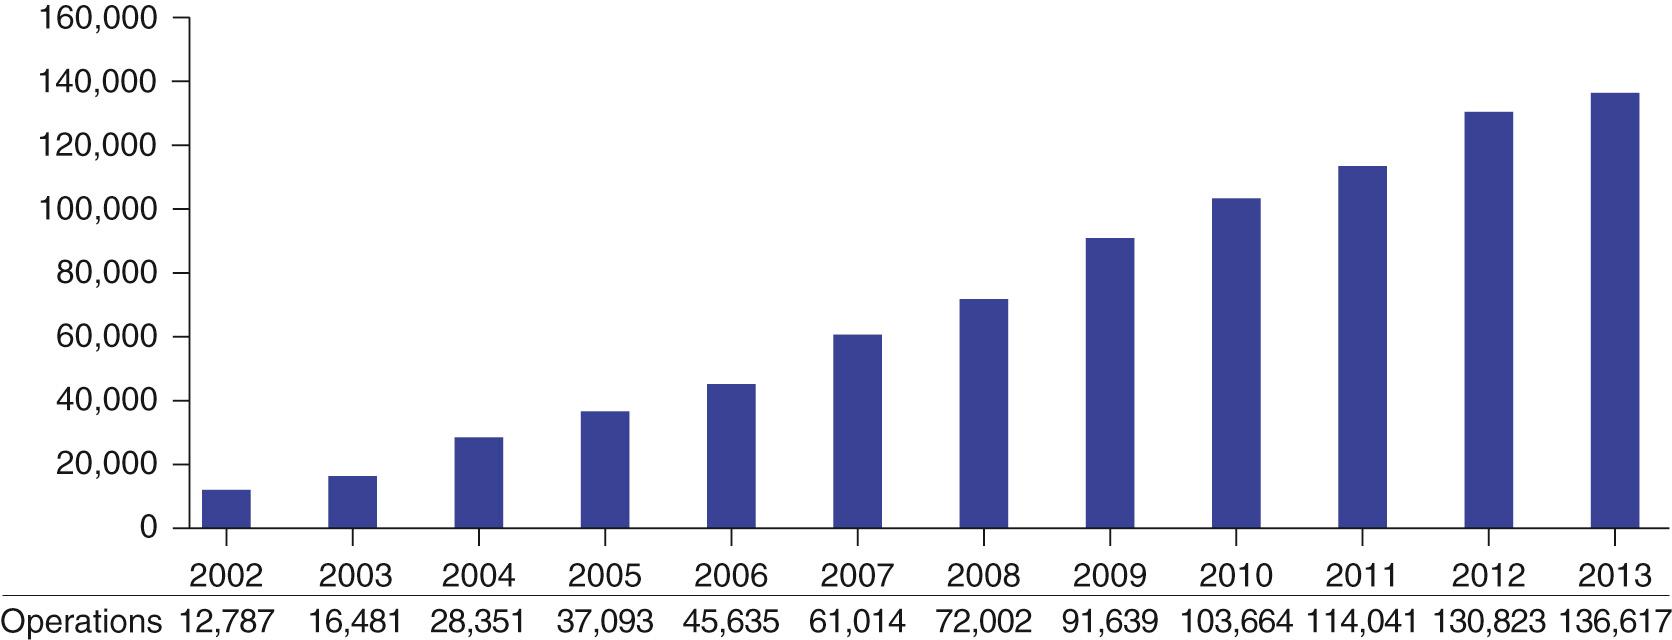 FIGURE 133-2, The annual growth of the Society of Thoracic Surgeons (STS) Congenital Heart Surgery Database by the number of operations per averaged 4-year data collection cycle. The aggregate report from the Fall 2013 Harvest of the STS Congenital Heart Surgery Database 19 includes 136,617 operations performed in the 4-year period of July 1, 2009, to June 30, 2013, inclusive, submitted from 120 hospitals in North America—117 in the United States and 3 in Canada.